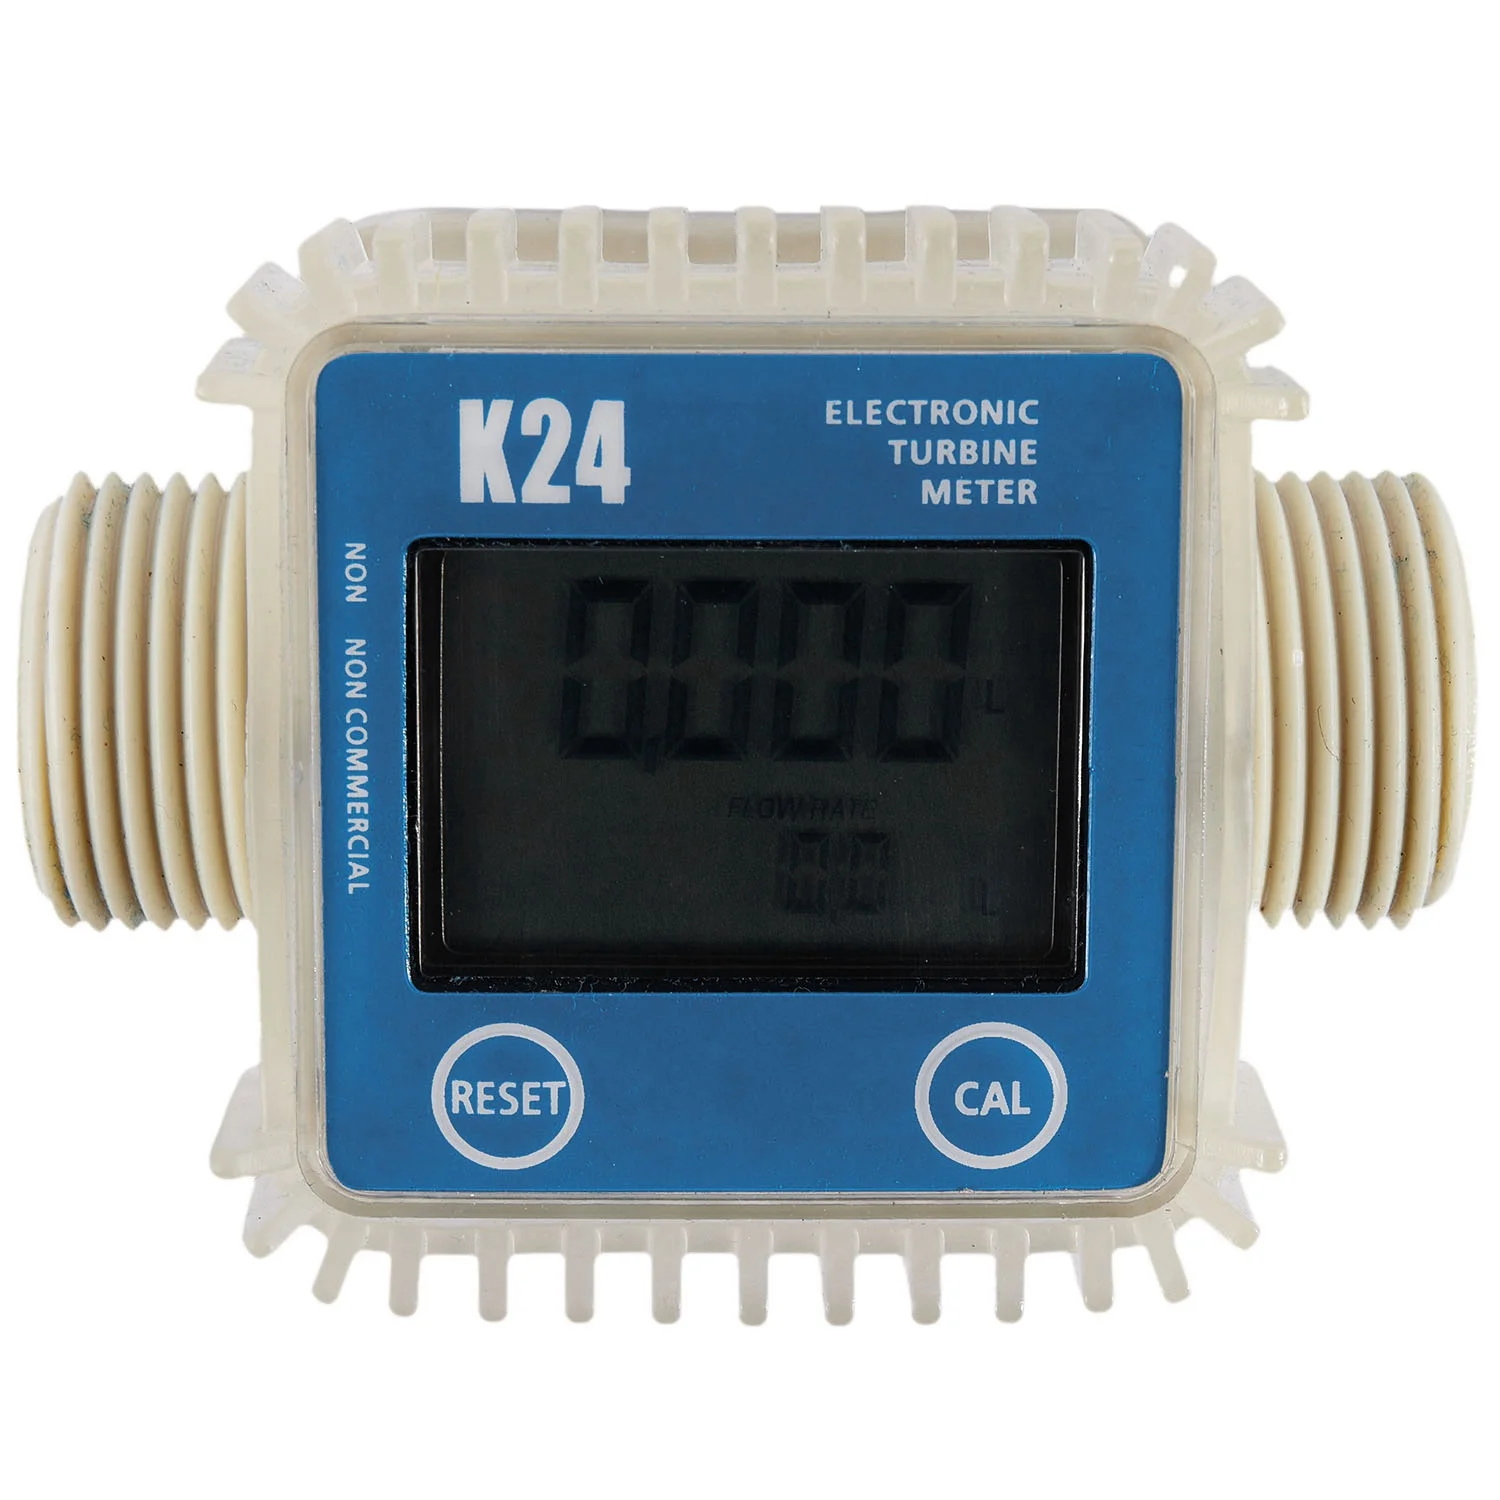 

1 Pcs K24 Lcd Turbine Digital Fuel Flow Meter Widely Used For Chemicals Water